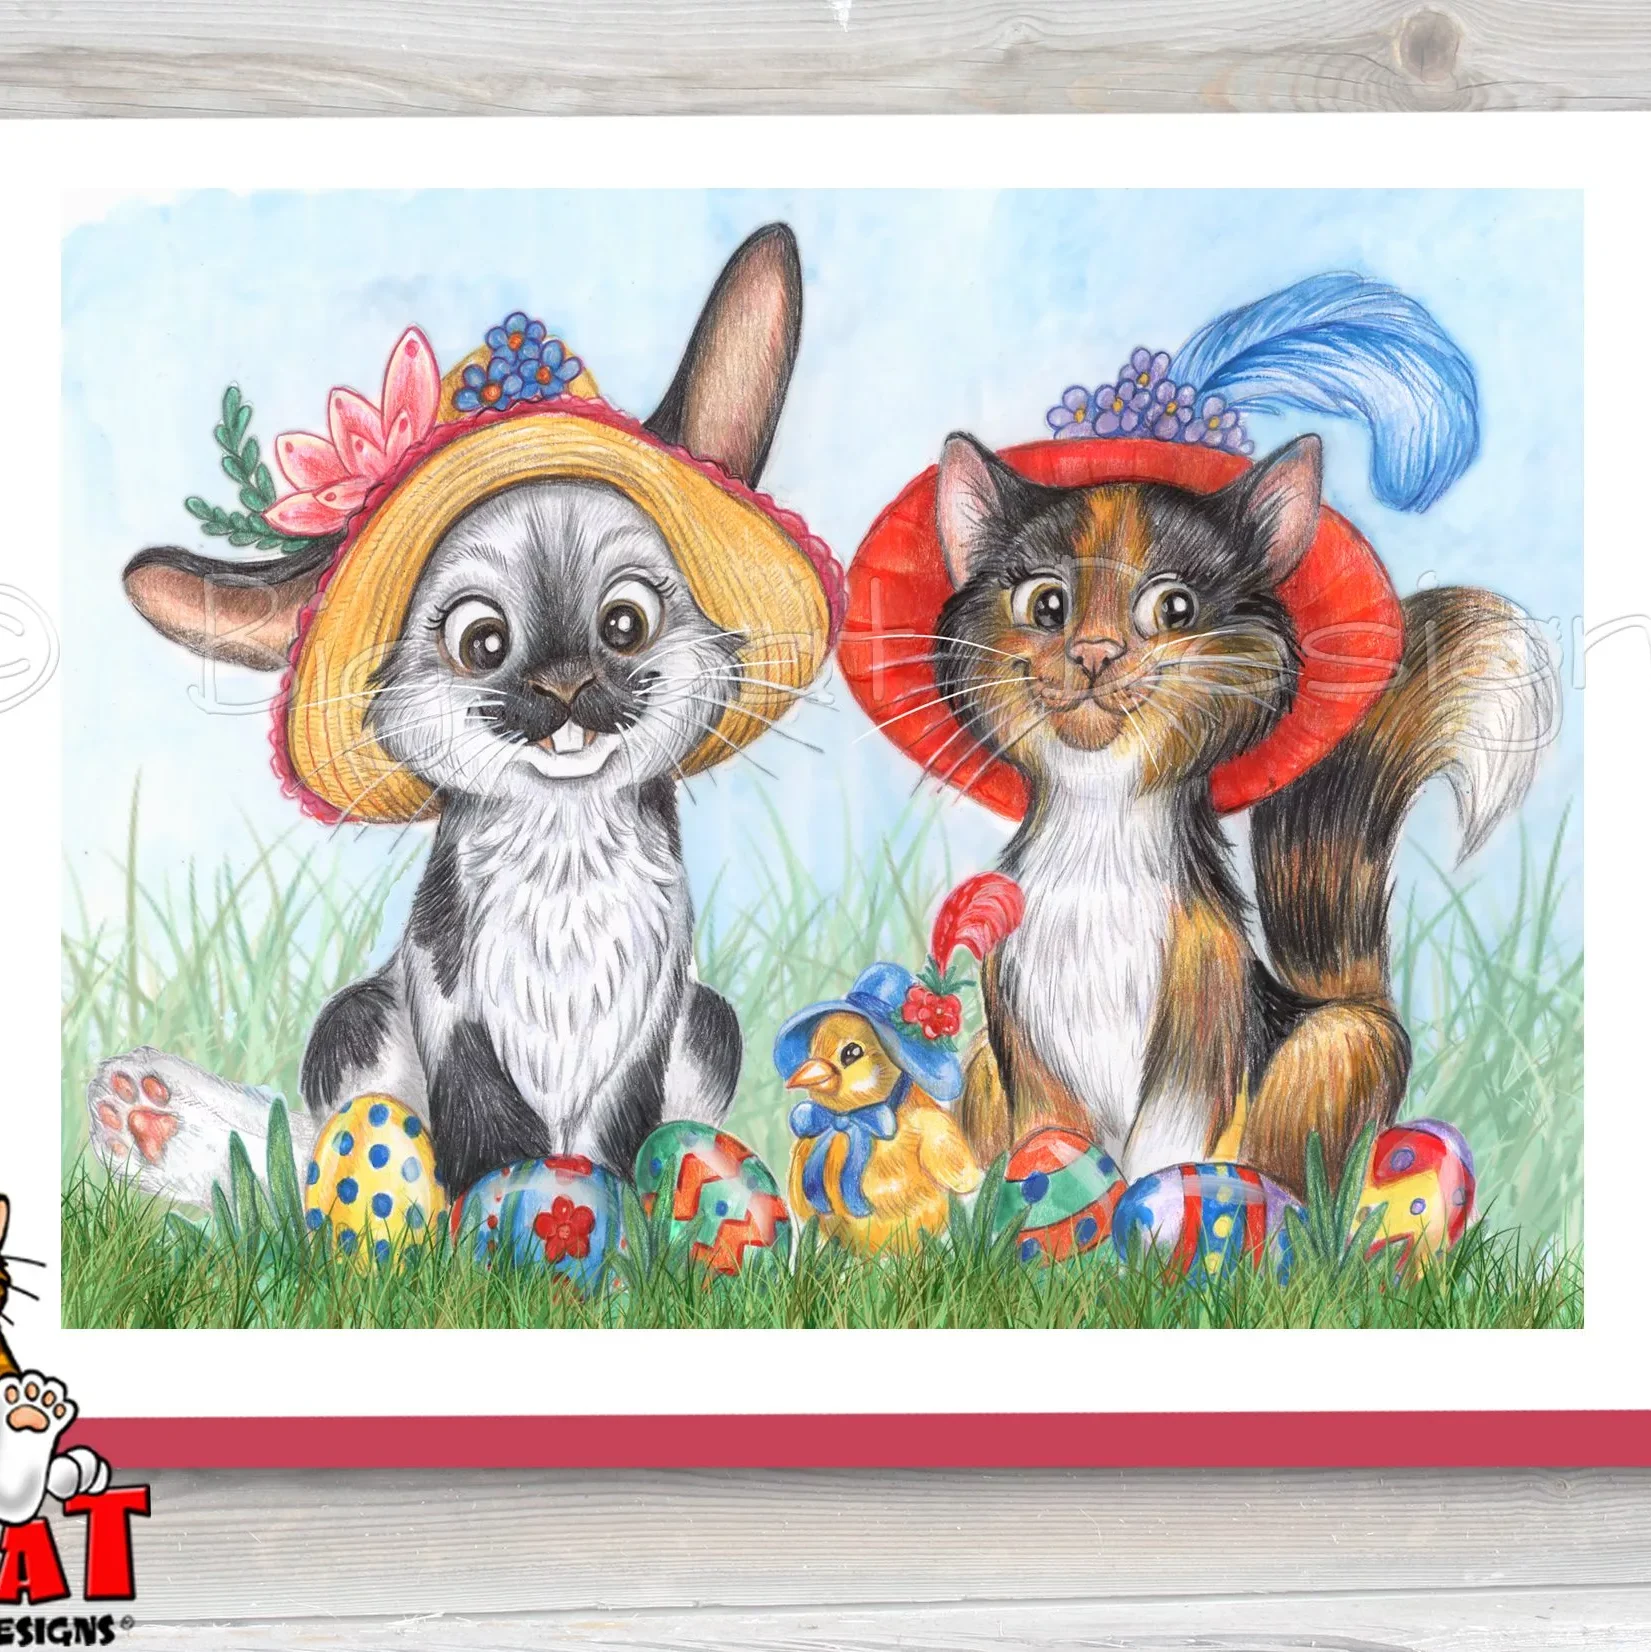 Paper Greeting card showing a bunny in a straw hat, a calico cat in a red hat and a baby chick in a blue bonnet. Easter Eggs in grass